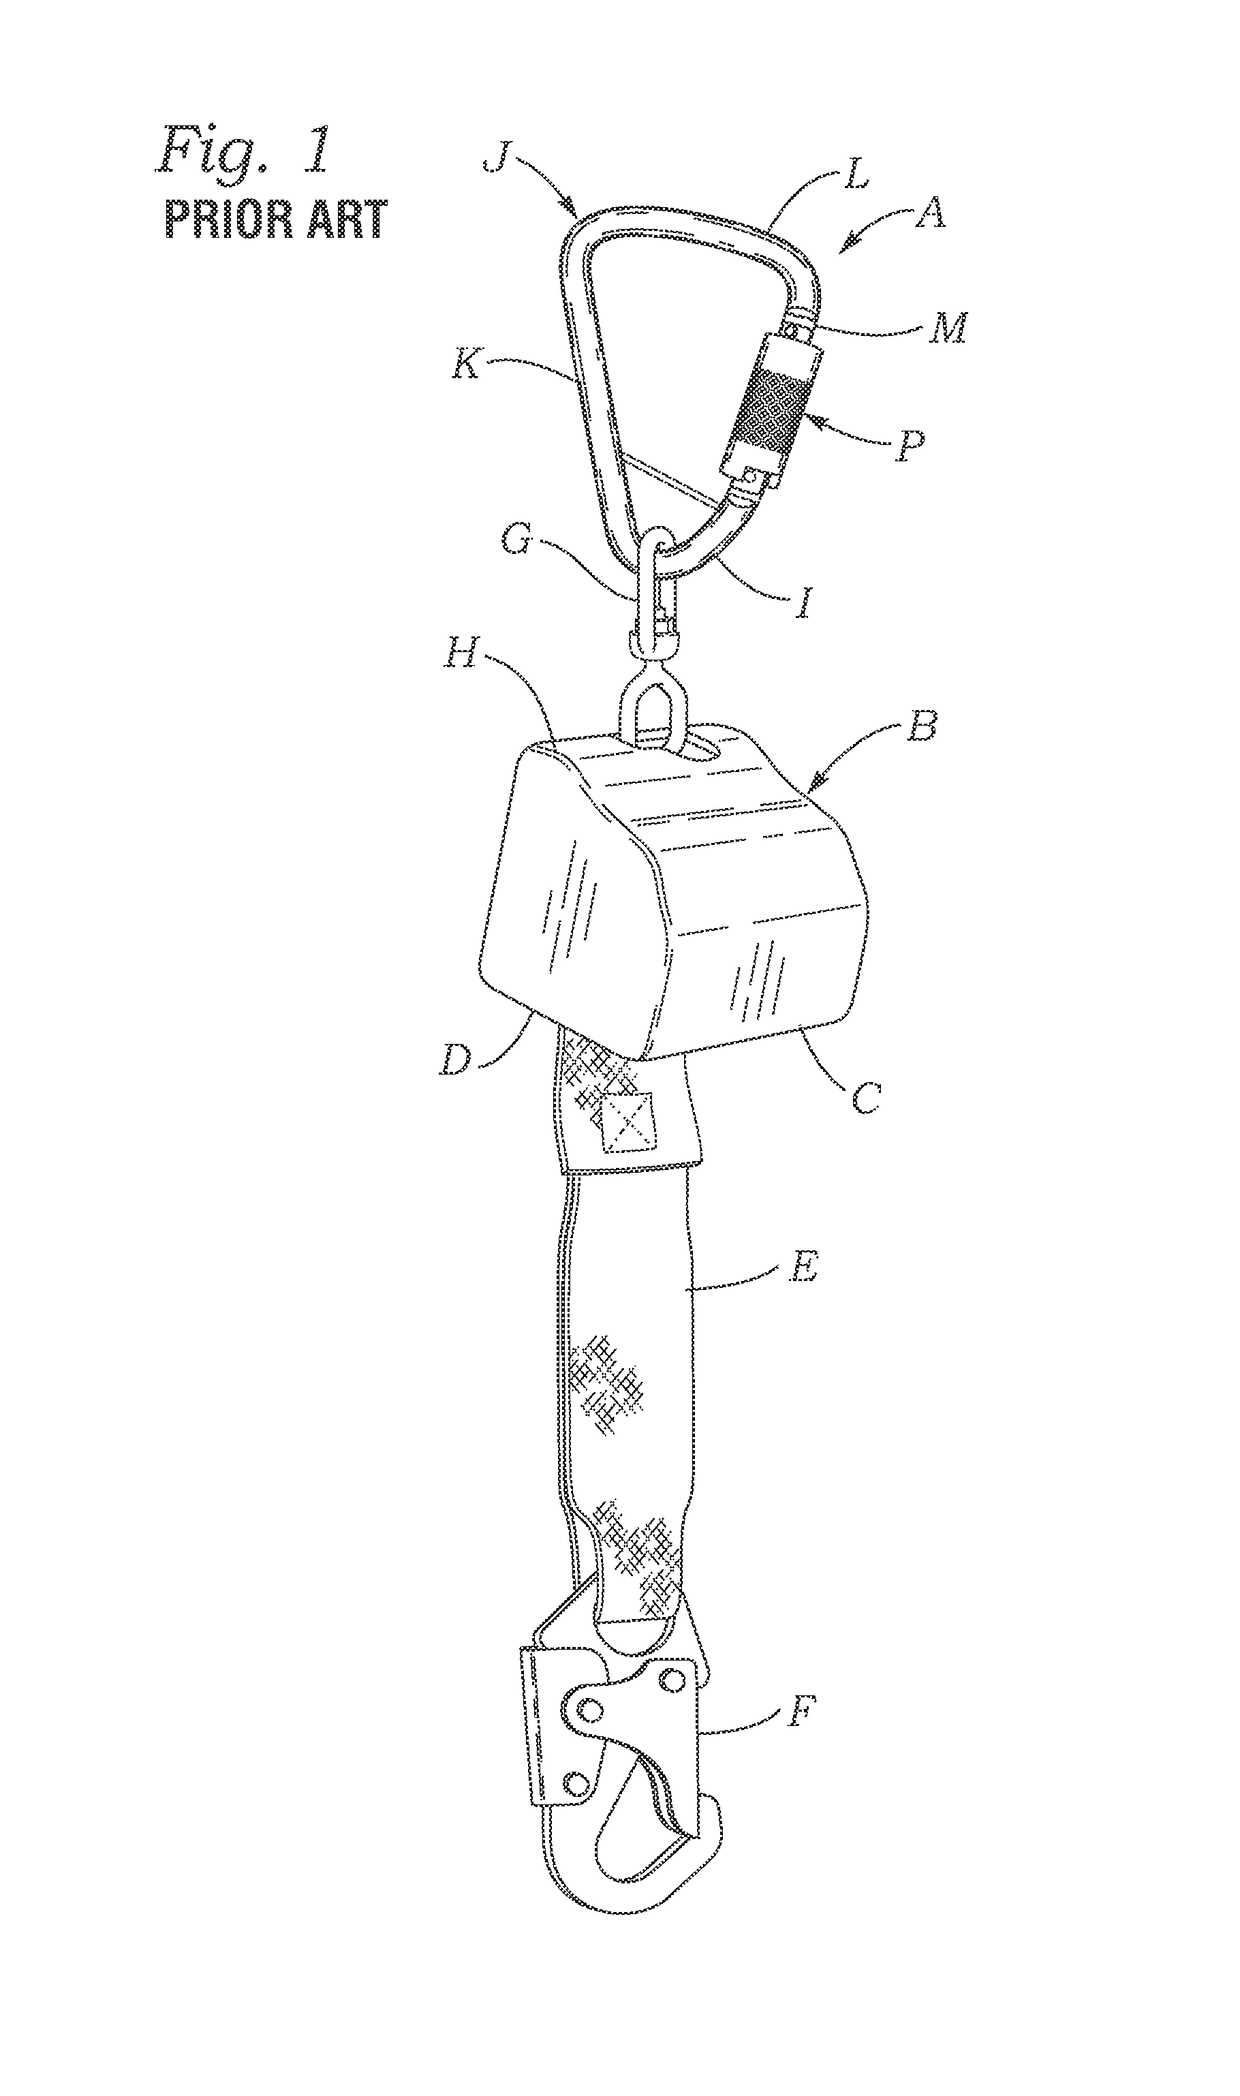 Remotely operable personal fall arrestment device and apparatus